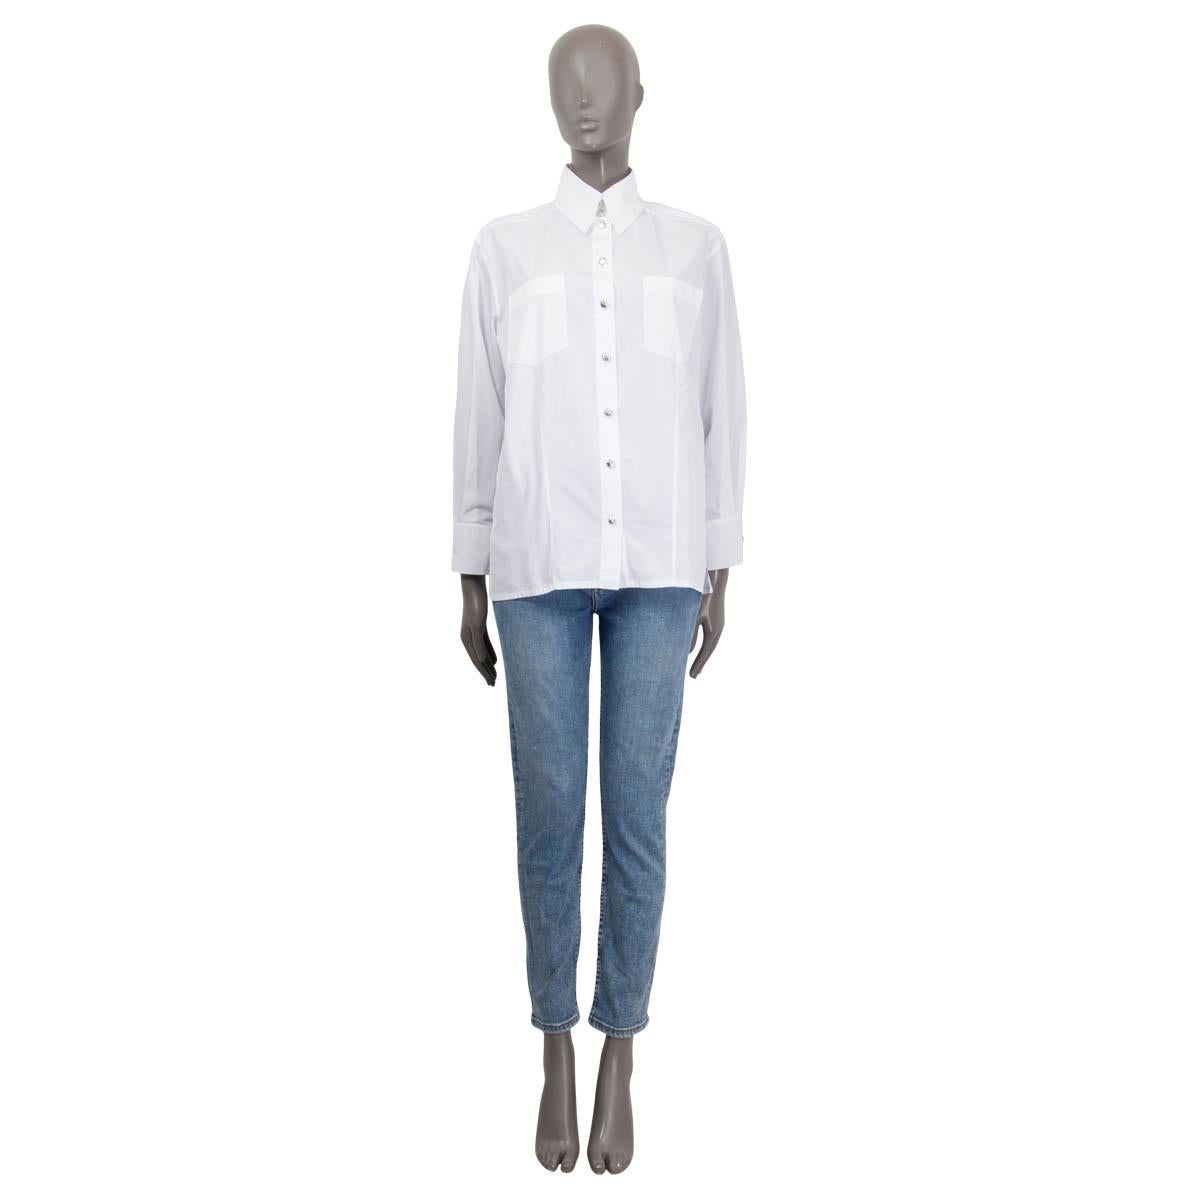 100% authentic Chanel classic poplin shirt in white cotton (100%). Features two patch pockets on the front and buttoned cuffs. Opens with nine silver-tone metal buttons on the front. Unlined. Has been worn once and is in virtually new condition.